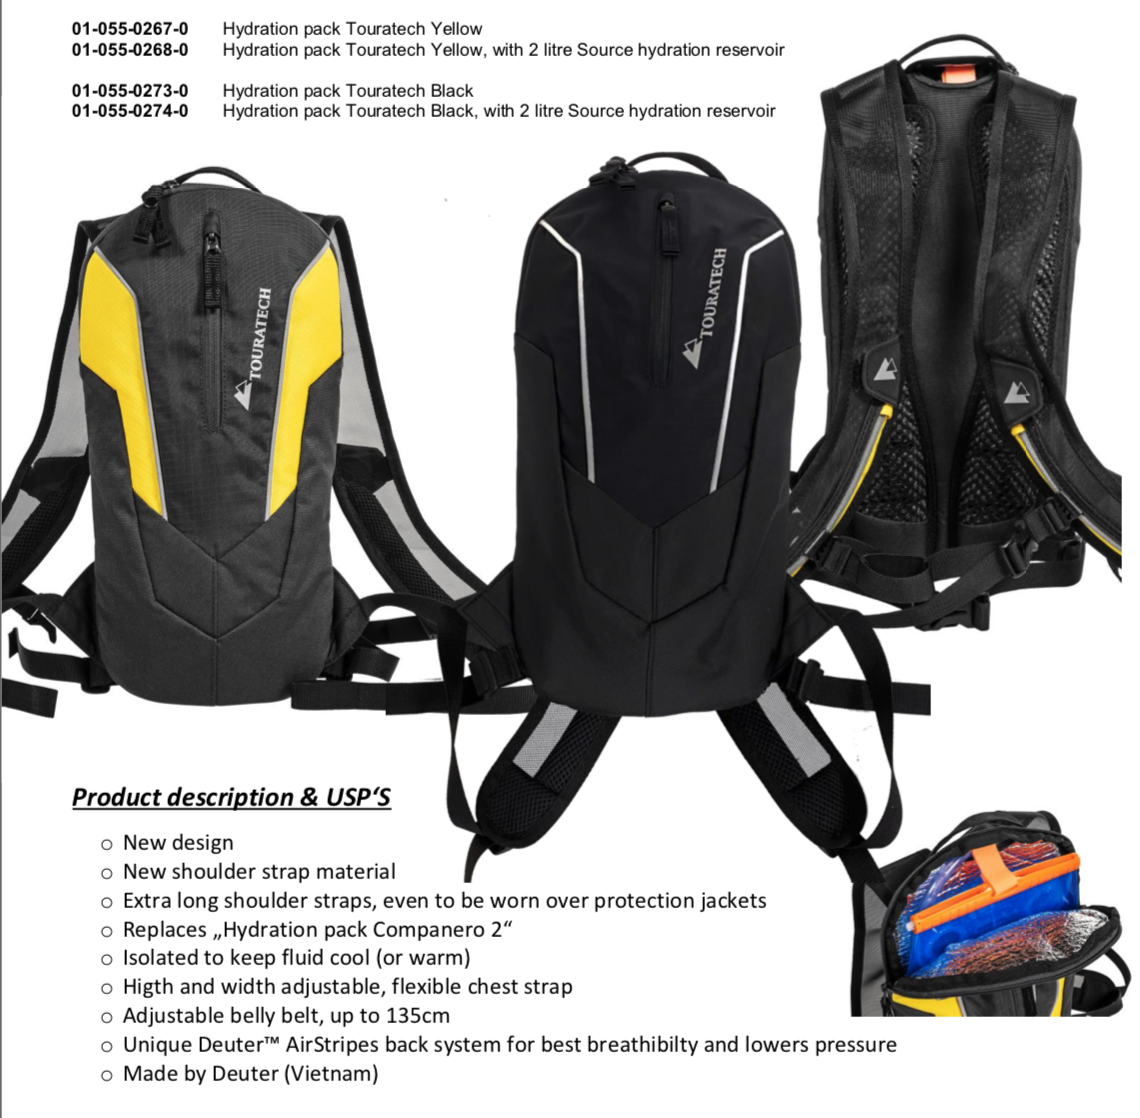 Hydration pack Touratech Black